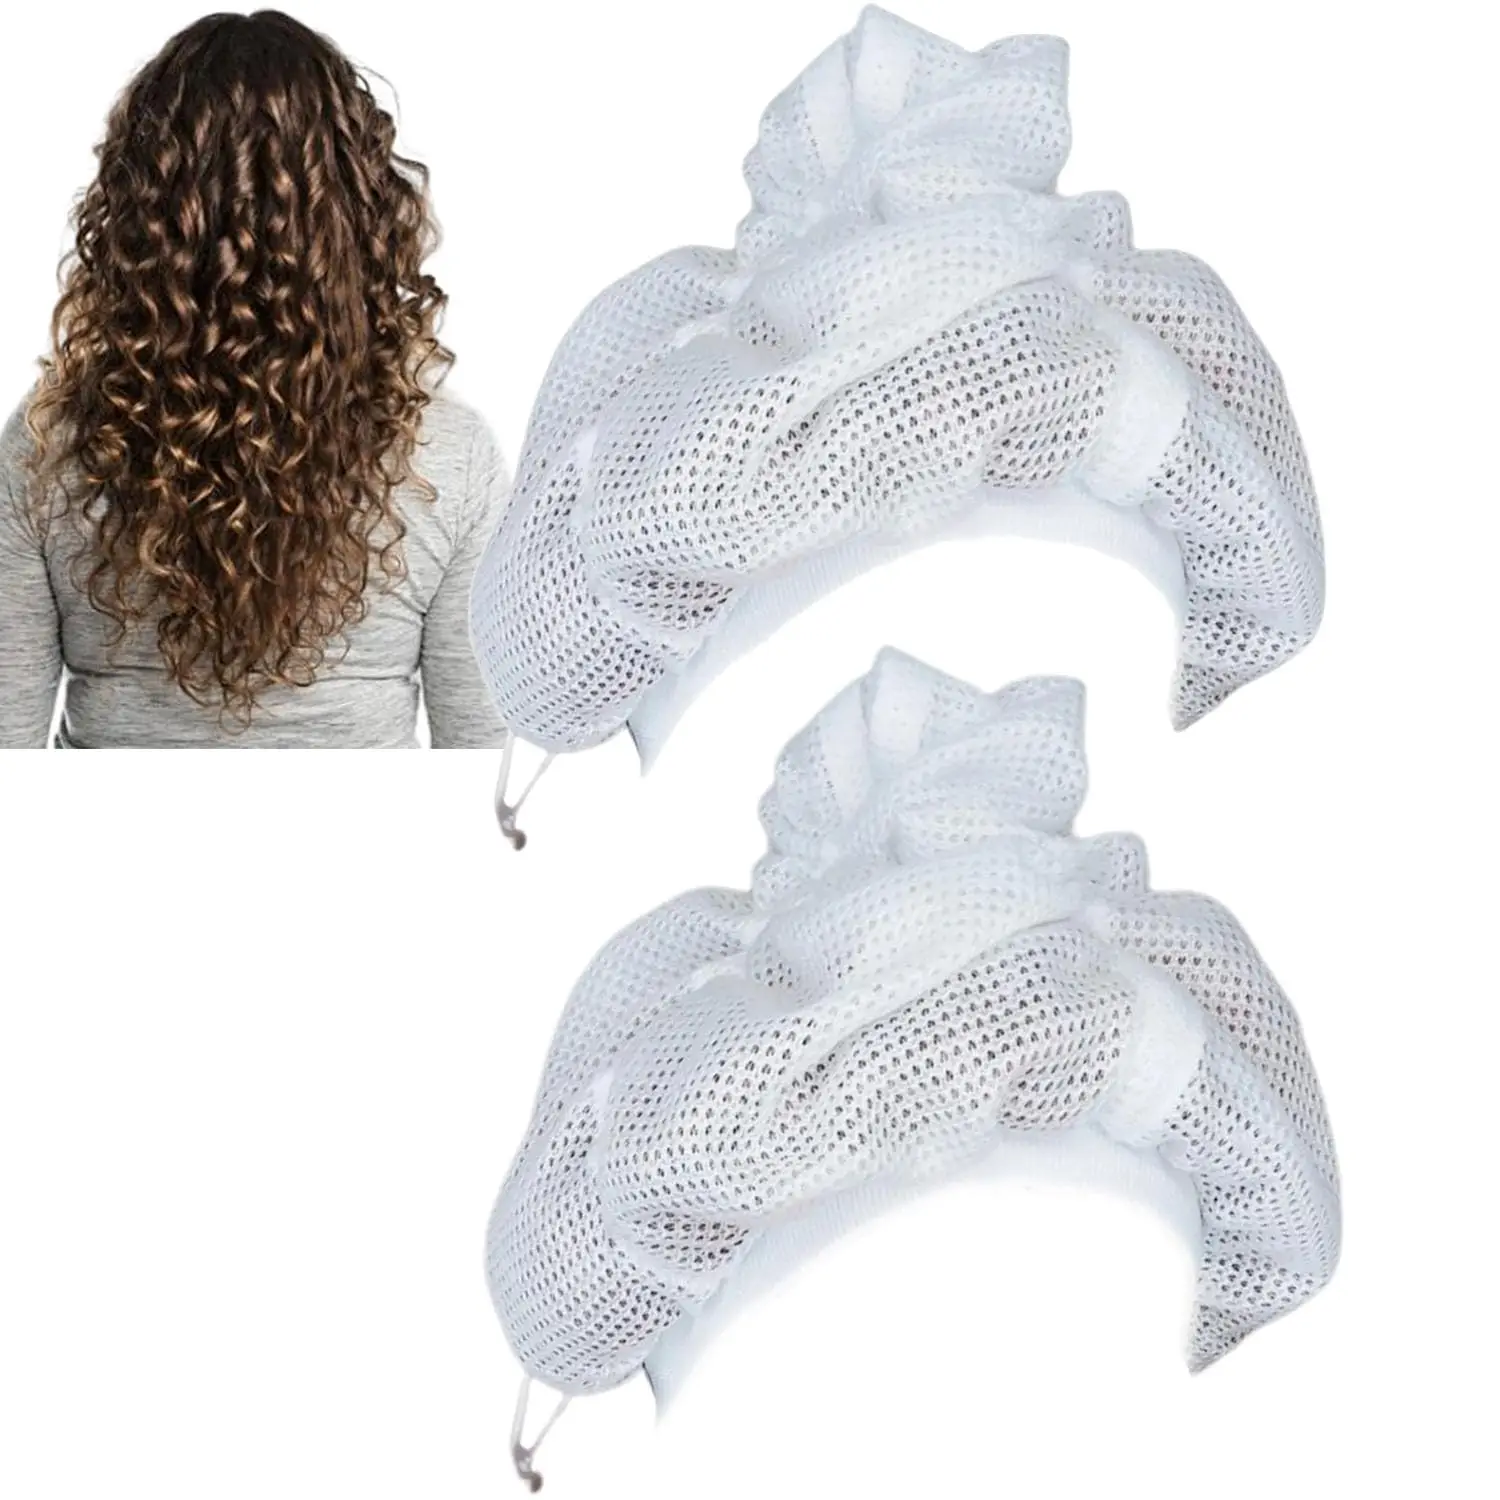 

2024 New Adjustable Net Plopping Bonnet Blowdrying Long Hair style Upgraded Net Plopping Cap For Drying Curly Hair